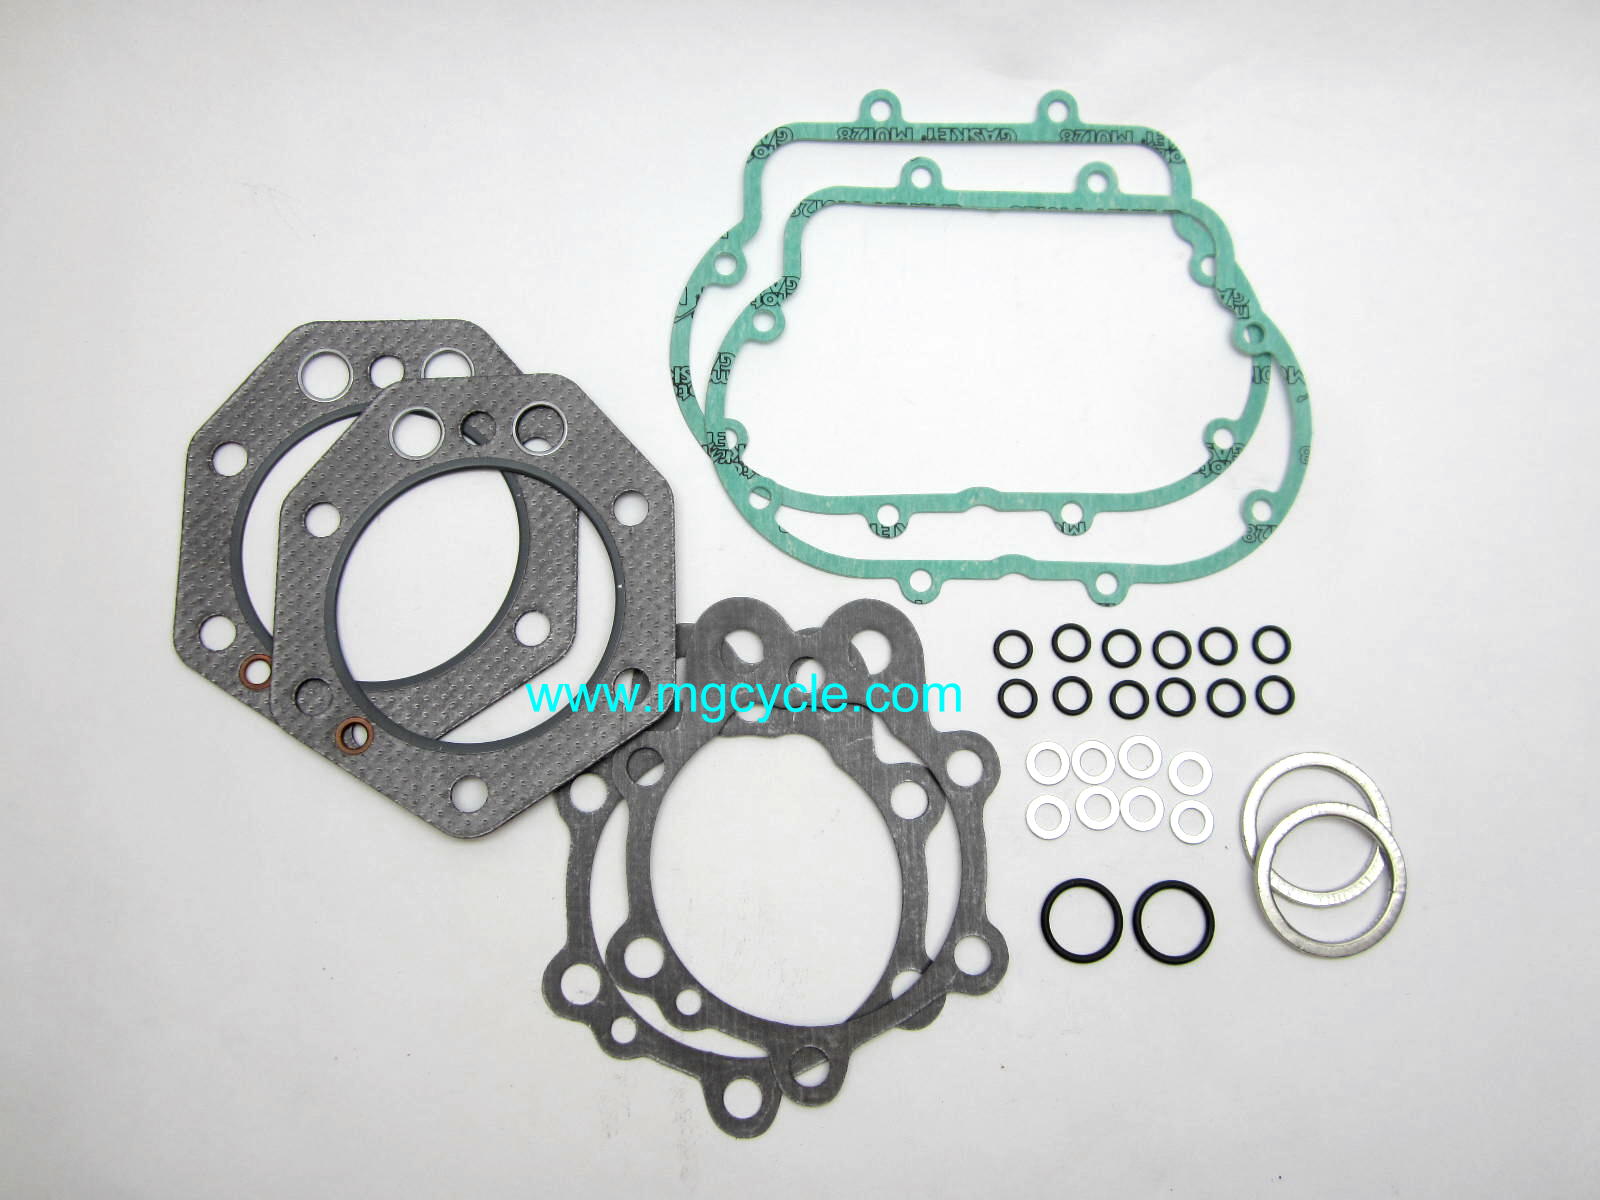 Top end engine gasket set for 1000cc 88mm round heads